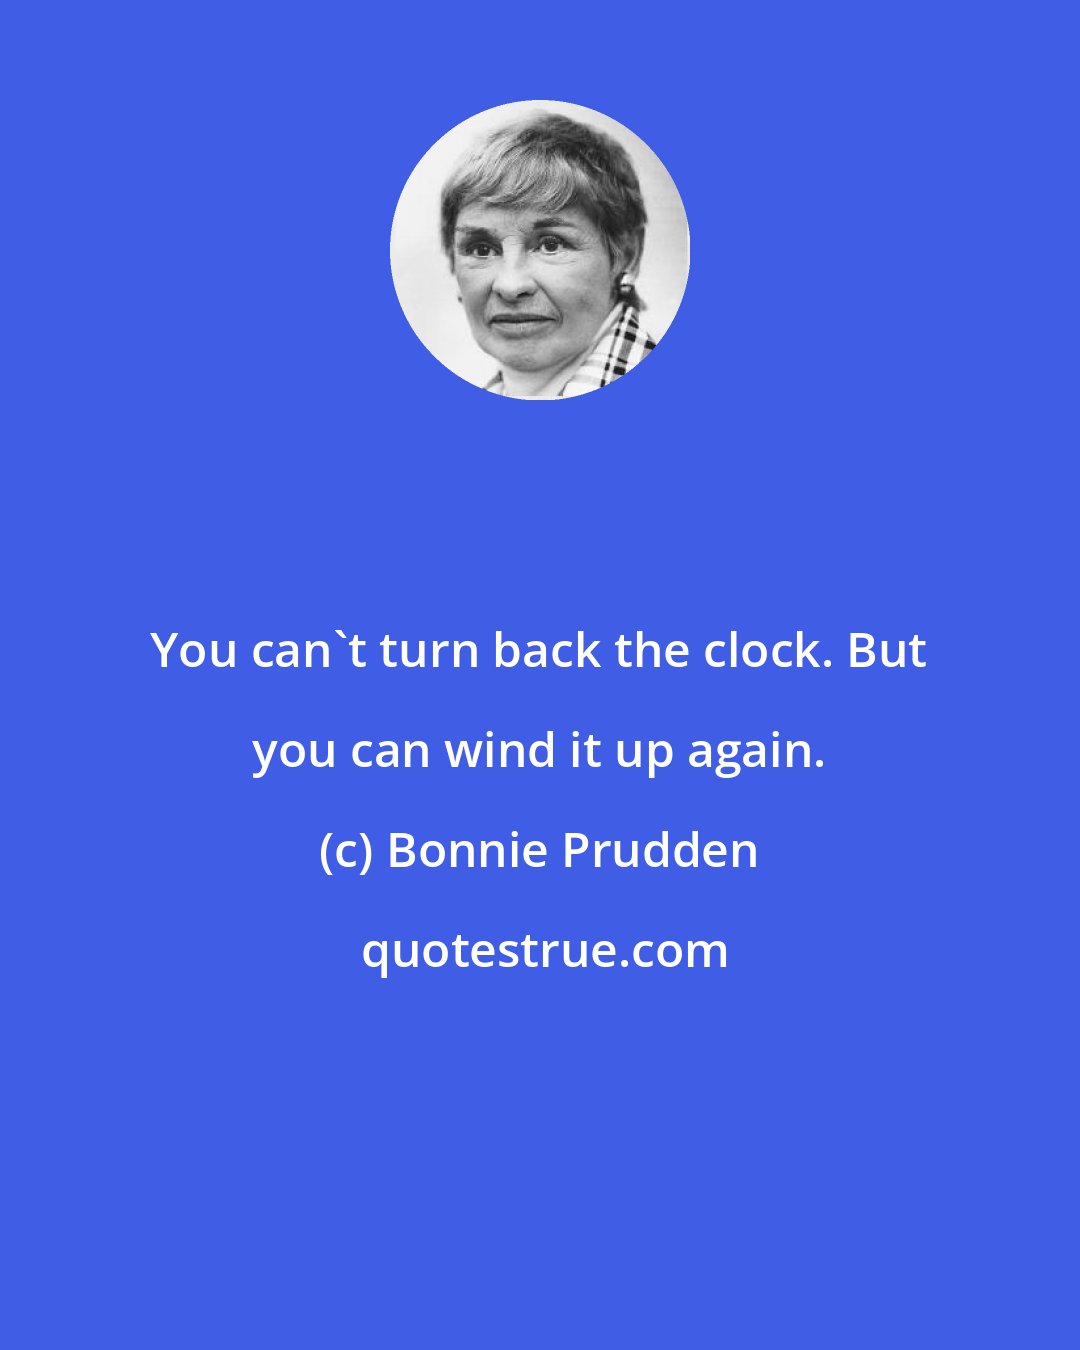 Bonnie Prudden: You can't turn back the clock. But you can wind it up again.